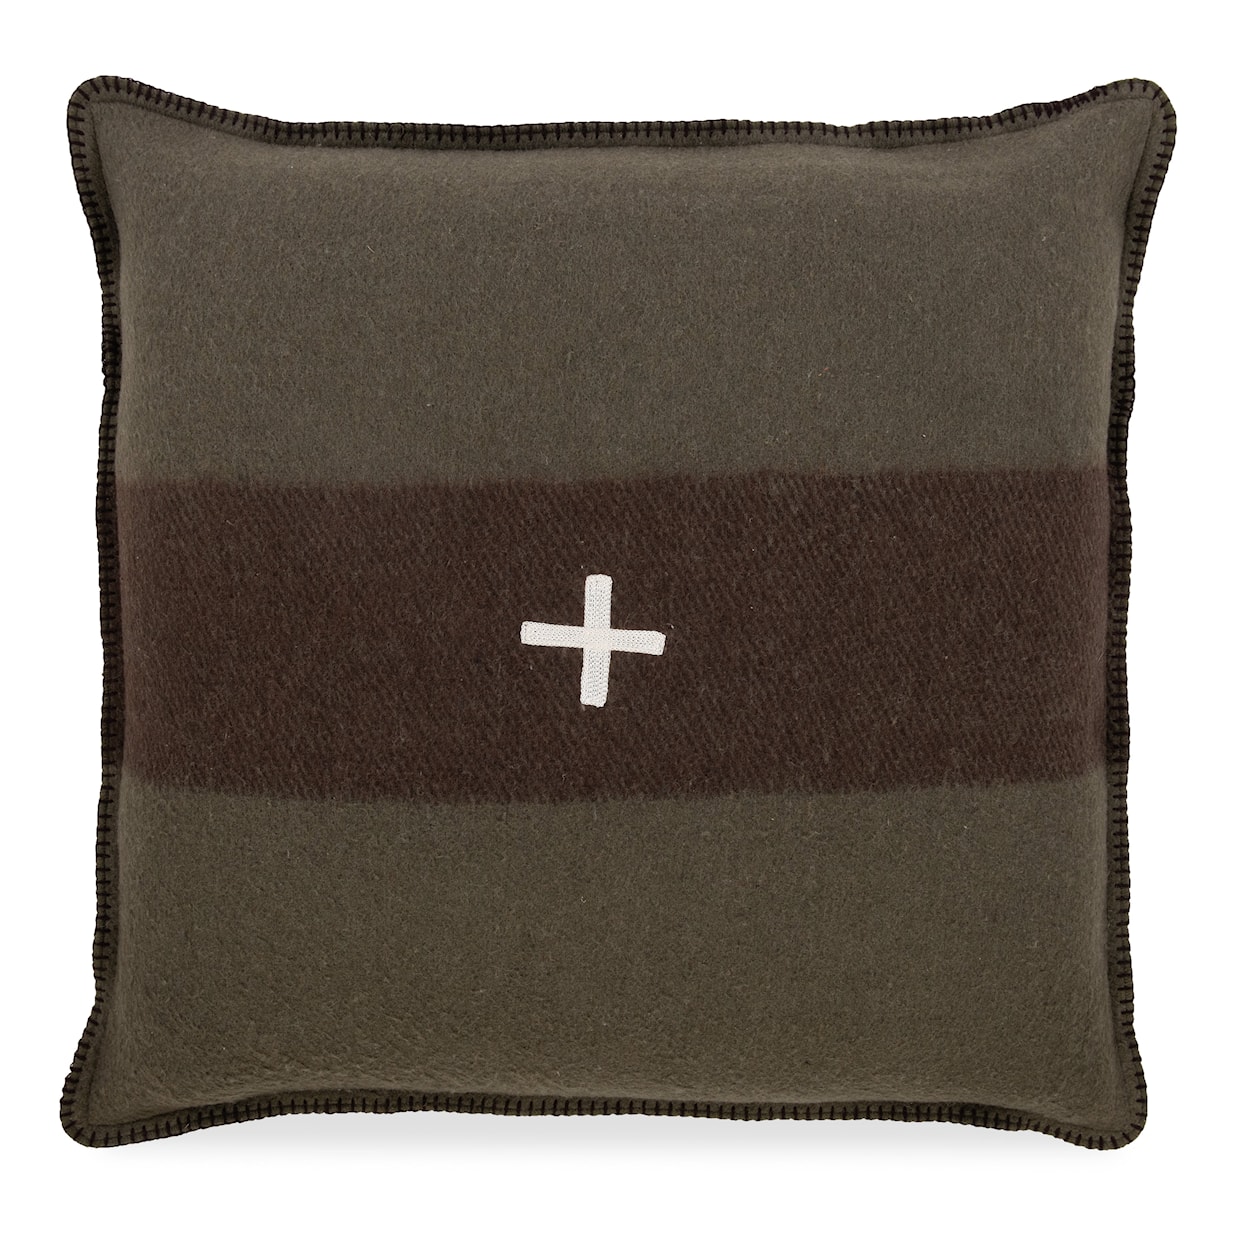 BOBO Intriguing Objects BOBO Intriguing Objects Swiss Army Pillow Cover 28x28 Green/Brown